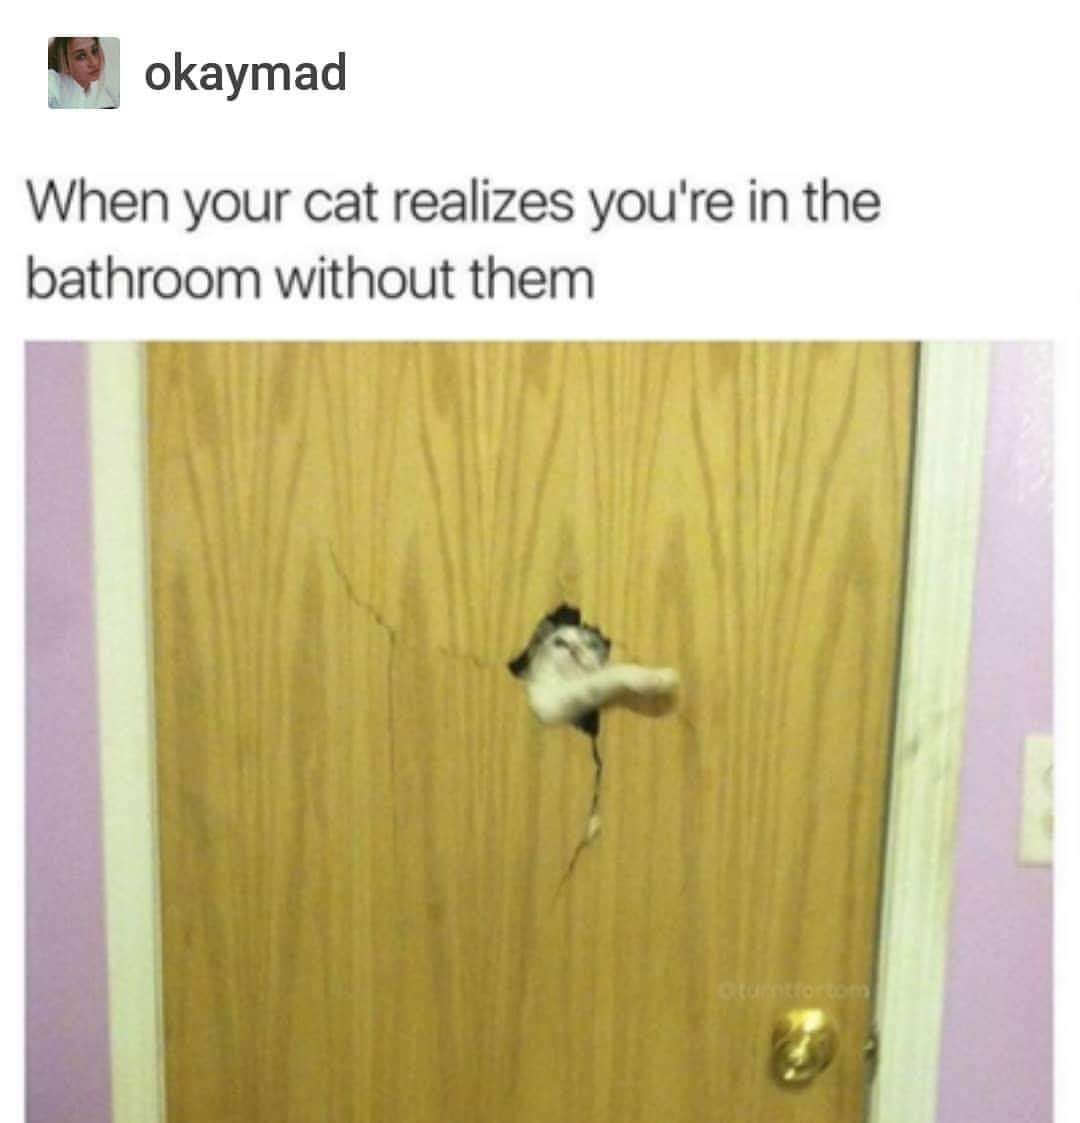 your cat realizes you re - okaymad When your cat realizes you're in the bathroom without them